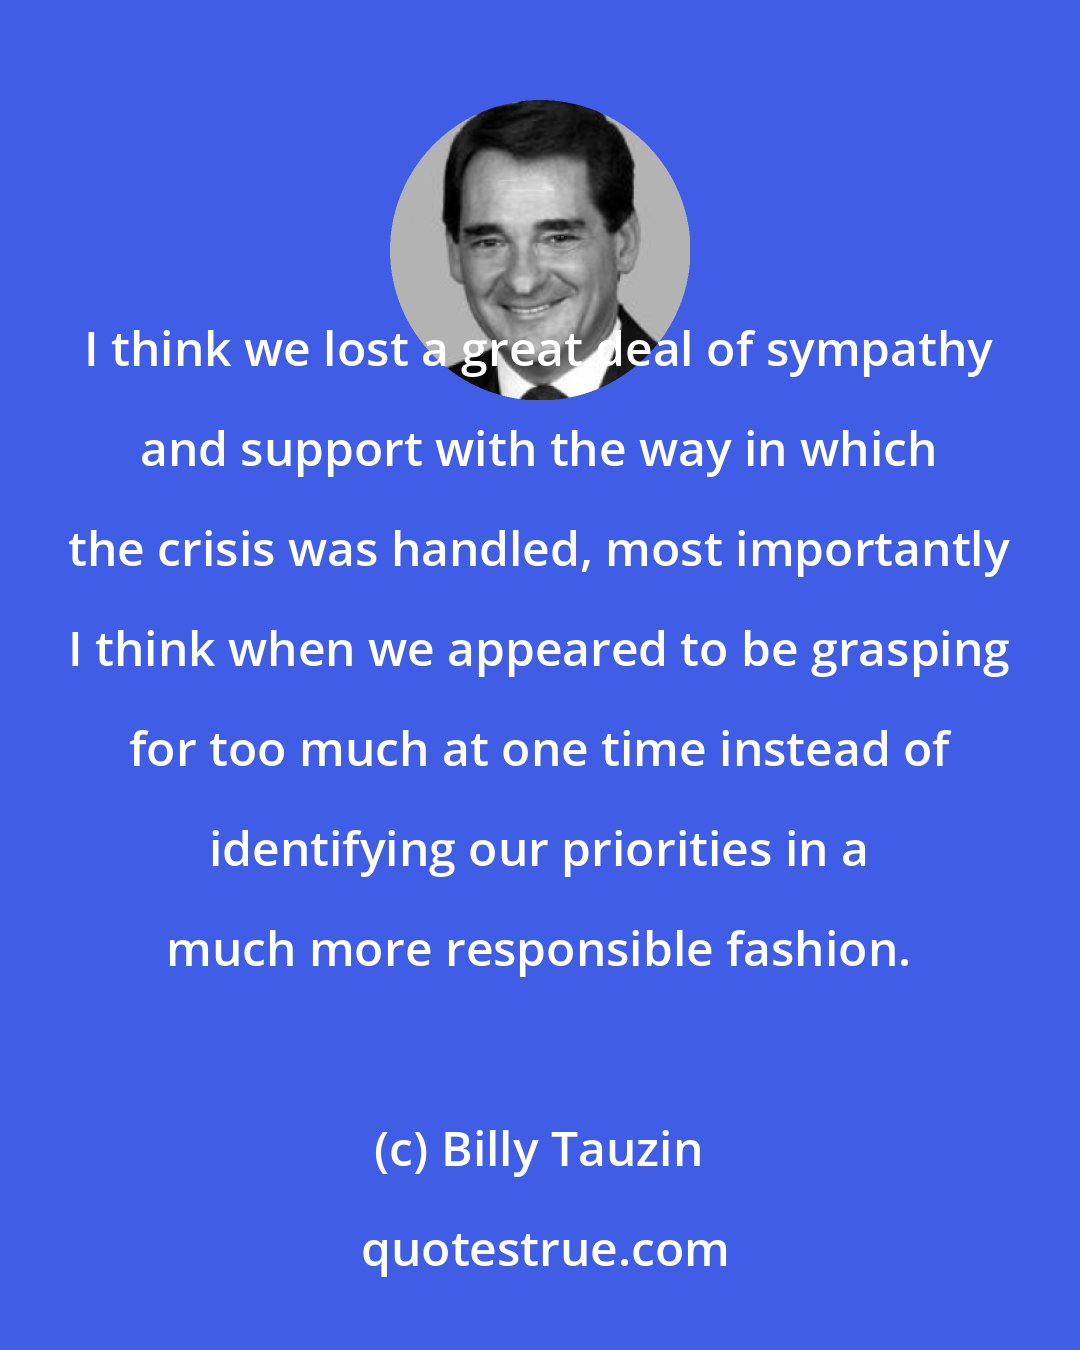 Billy Tauzin: I think we lost a great deal of sympathy and support with the way in which the crisis was handled, most importantly I think when we appeared to be grasping for too much at one time instead of identifying our priorities in a much more responsible fashion.